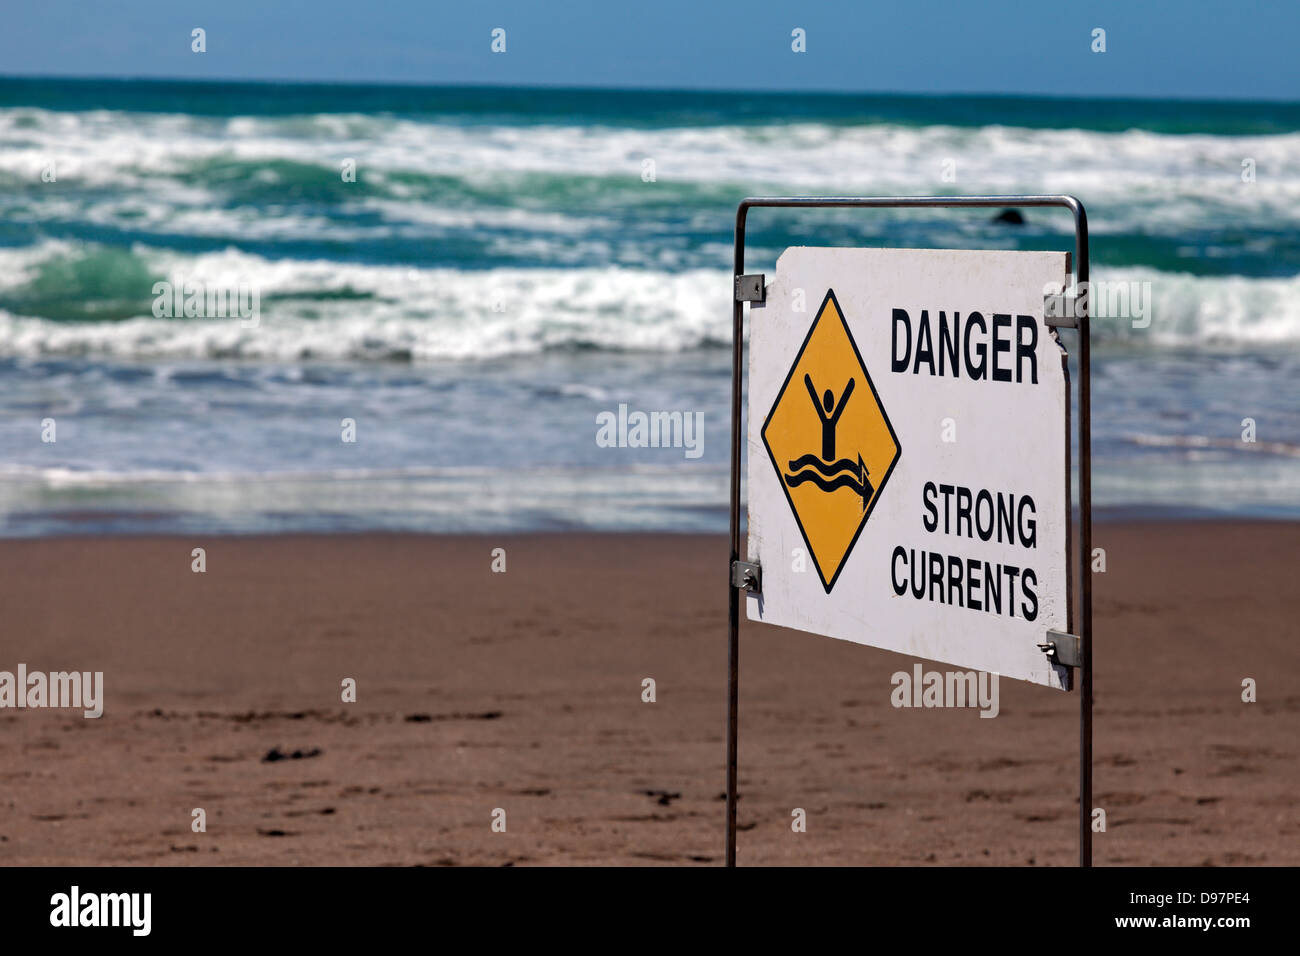 Danger - strong currents. Sign seen on the beach in New Zealand. Stock Photo